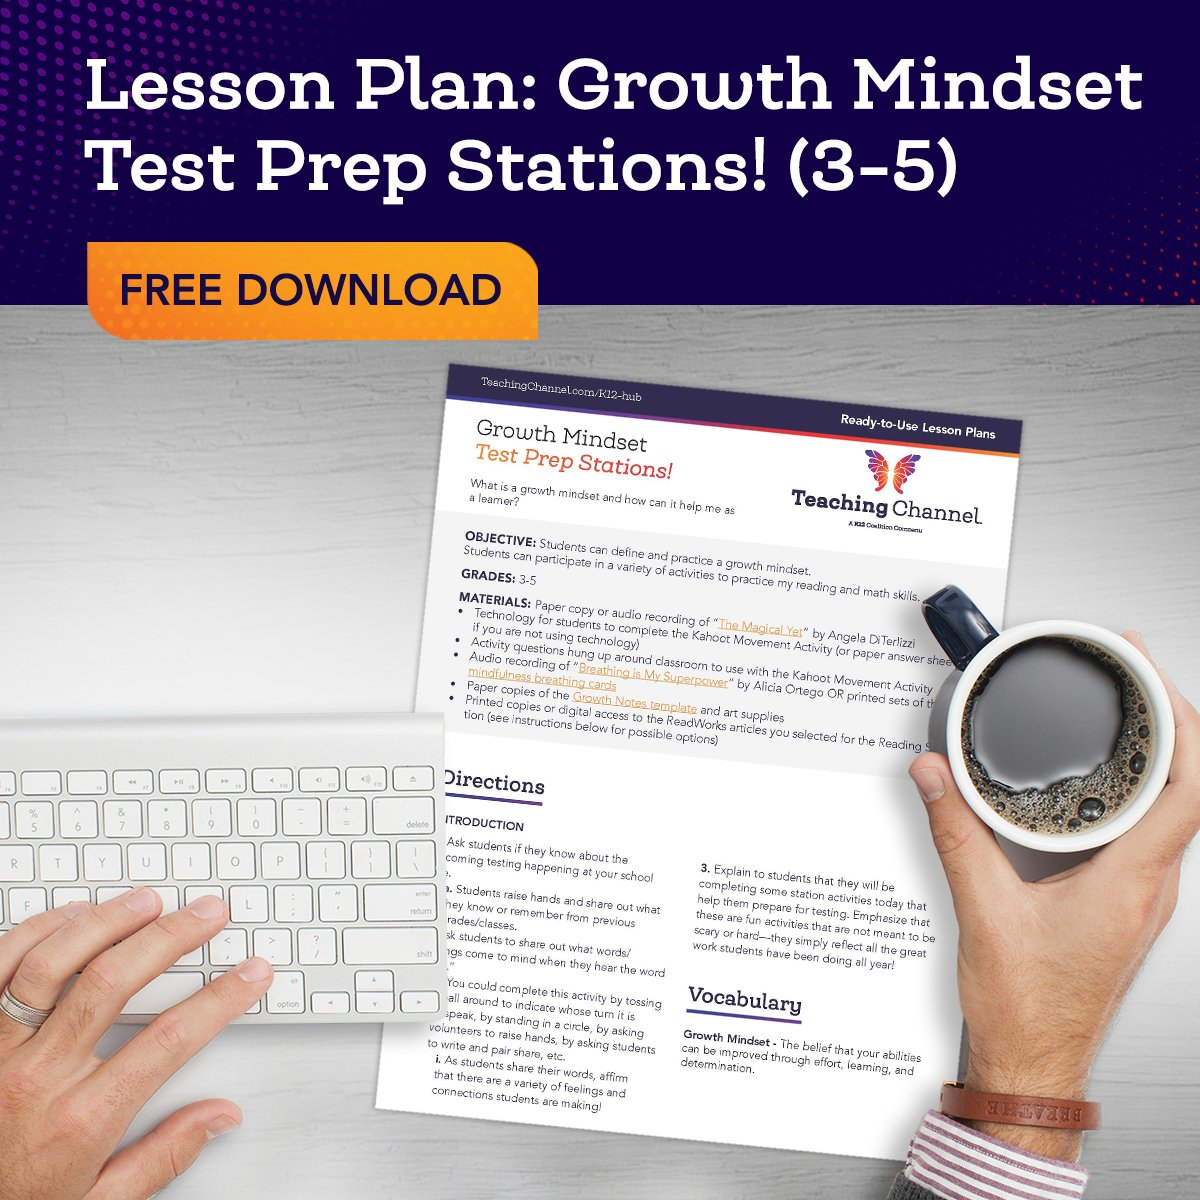 April a brings a sometimes-dreaded sidekick: testing season. But these station rotation ideas will help you prepare your elementary students for testing season by reviewing academic skills with a growth mindset: bit.ly/4amyfK1. #lessonplan #teachertips